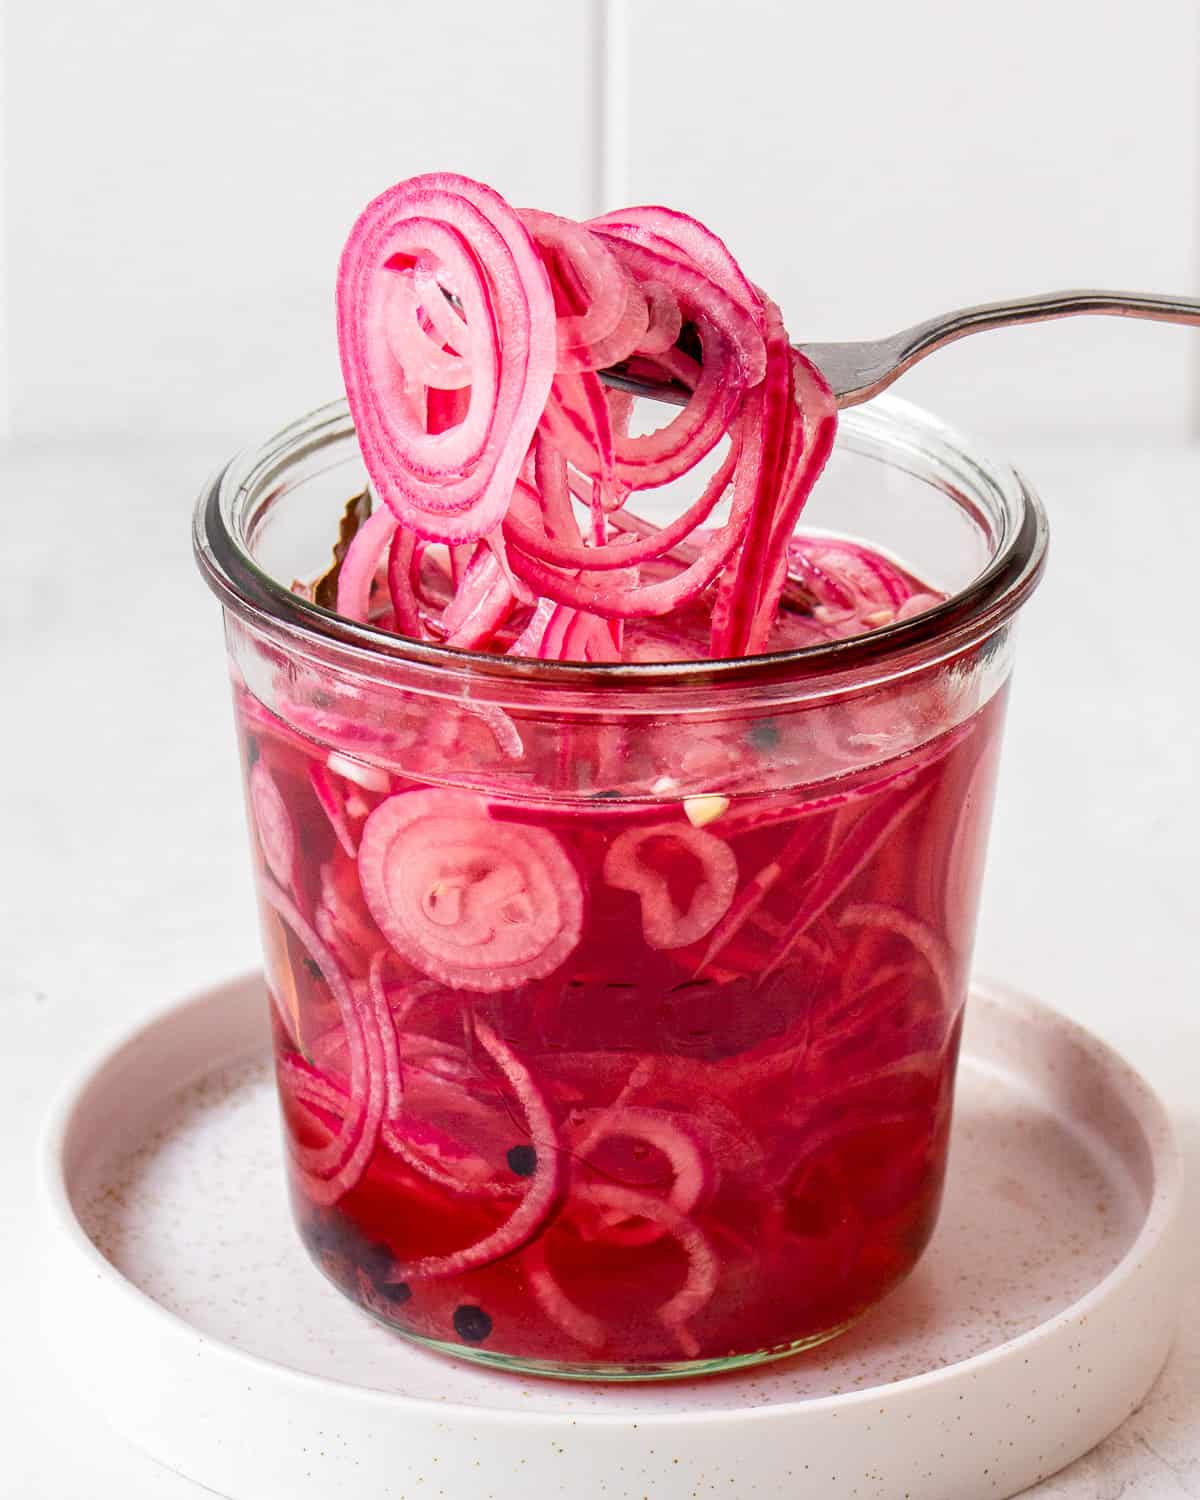 Fork with vinegar pickled red onion slices.